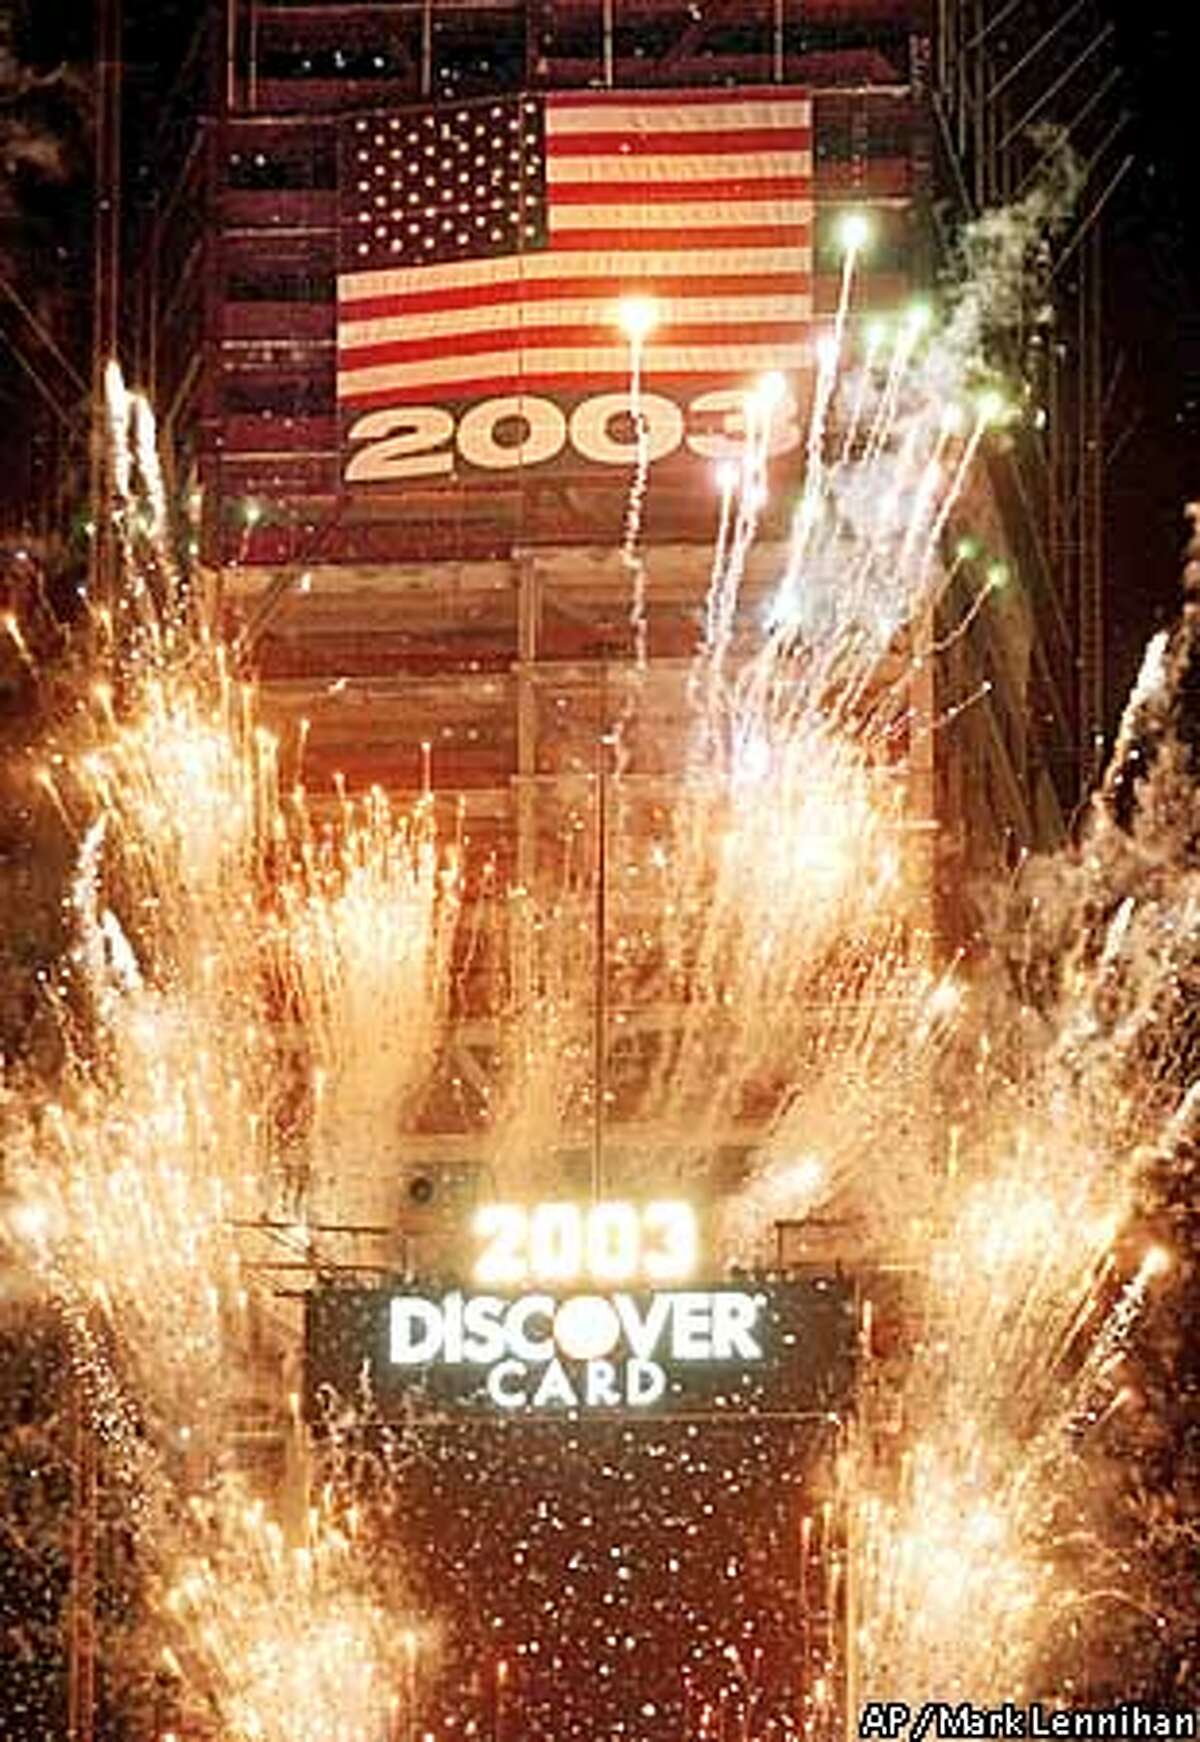 Fireworks light New York's Times Square moments after the New Year begins Wednesday, Jan. 1, 2003. An American flag is draped from a building under construction behind the ball drop at 1 Times Square. (AP Photo/Mark Lennihan)